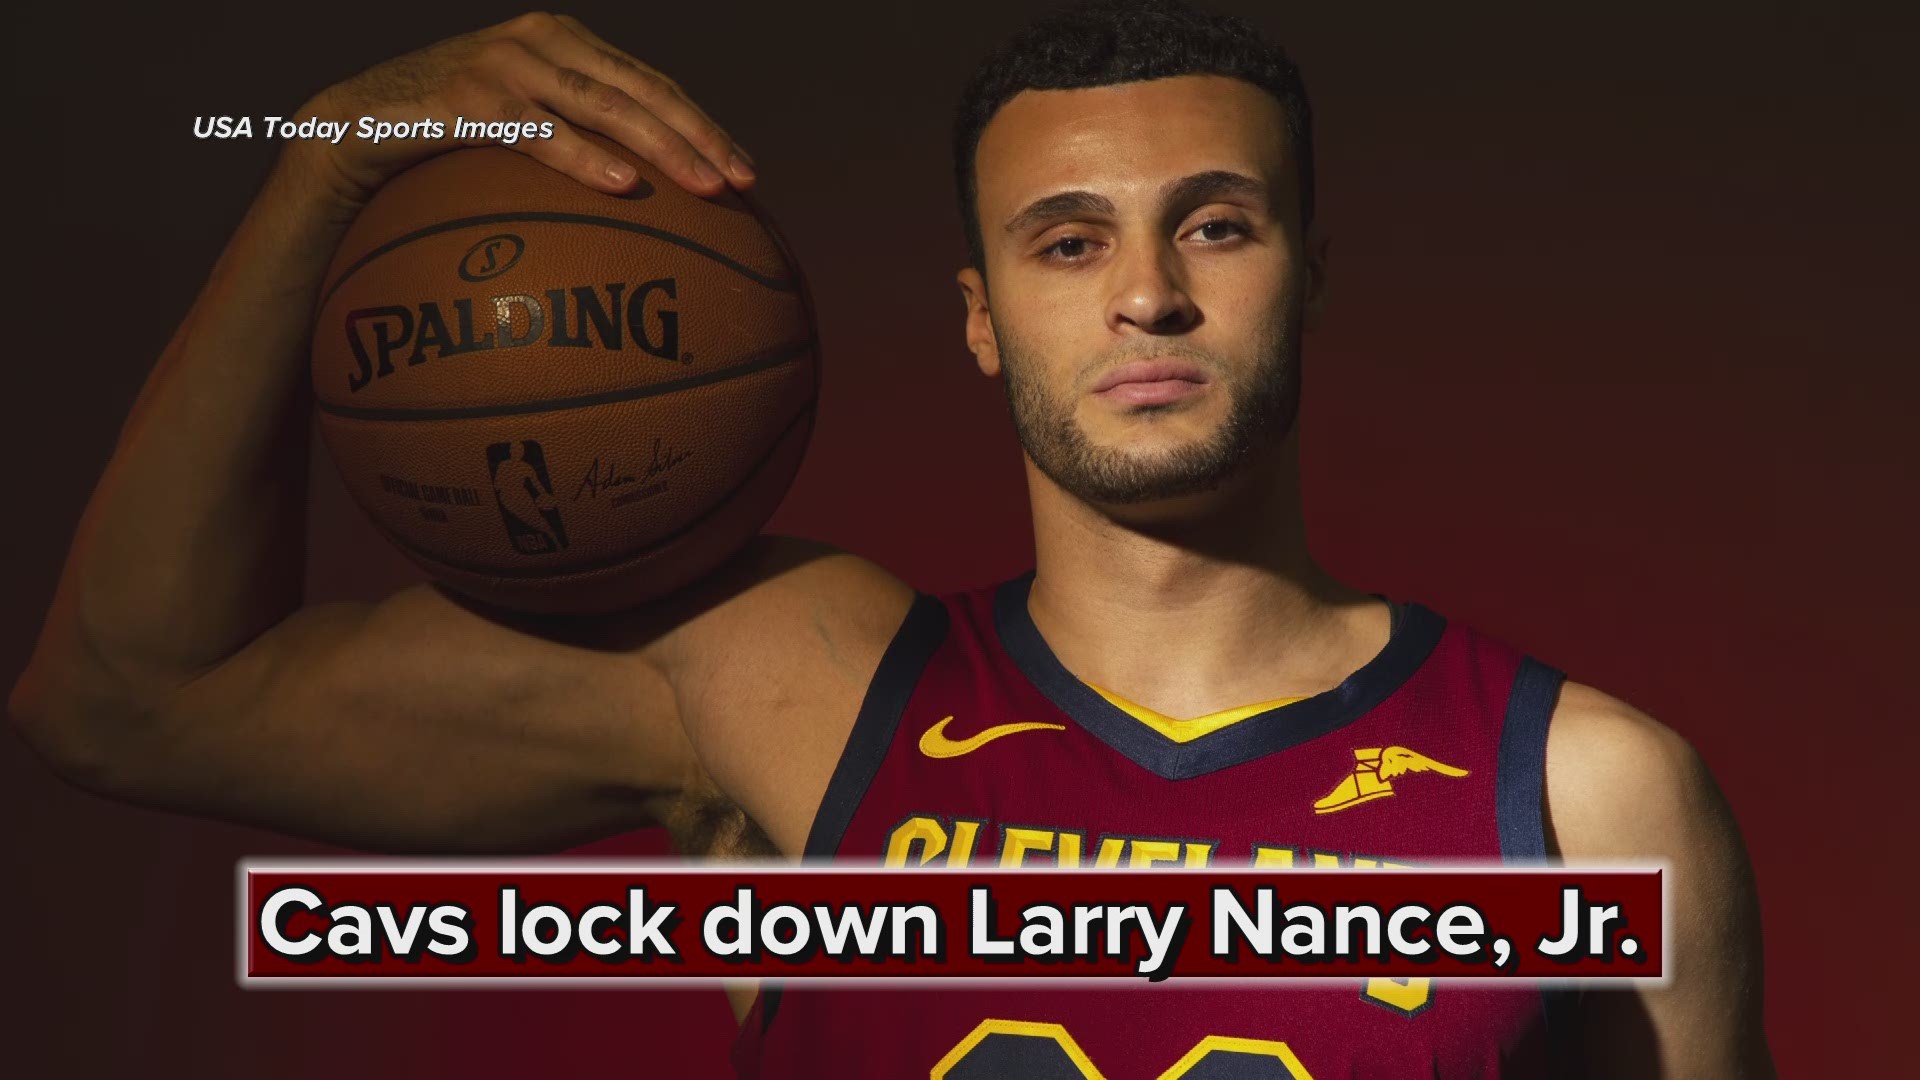 Report: Cleveland Cavaliers sign Larry Nance Jr. to 4-year, $45 million extension